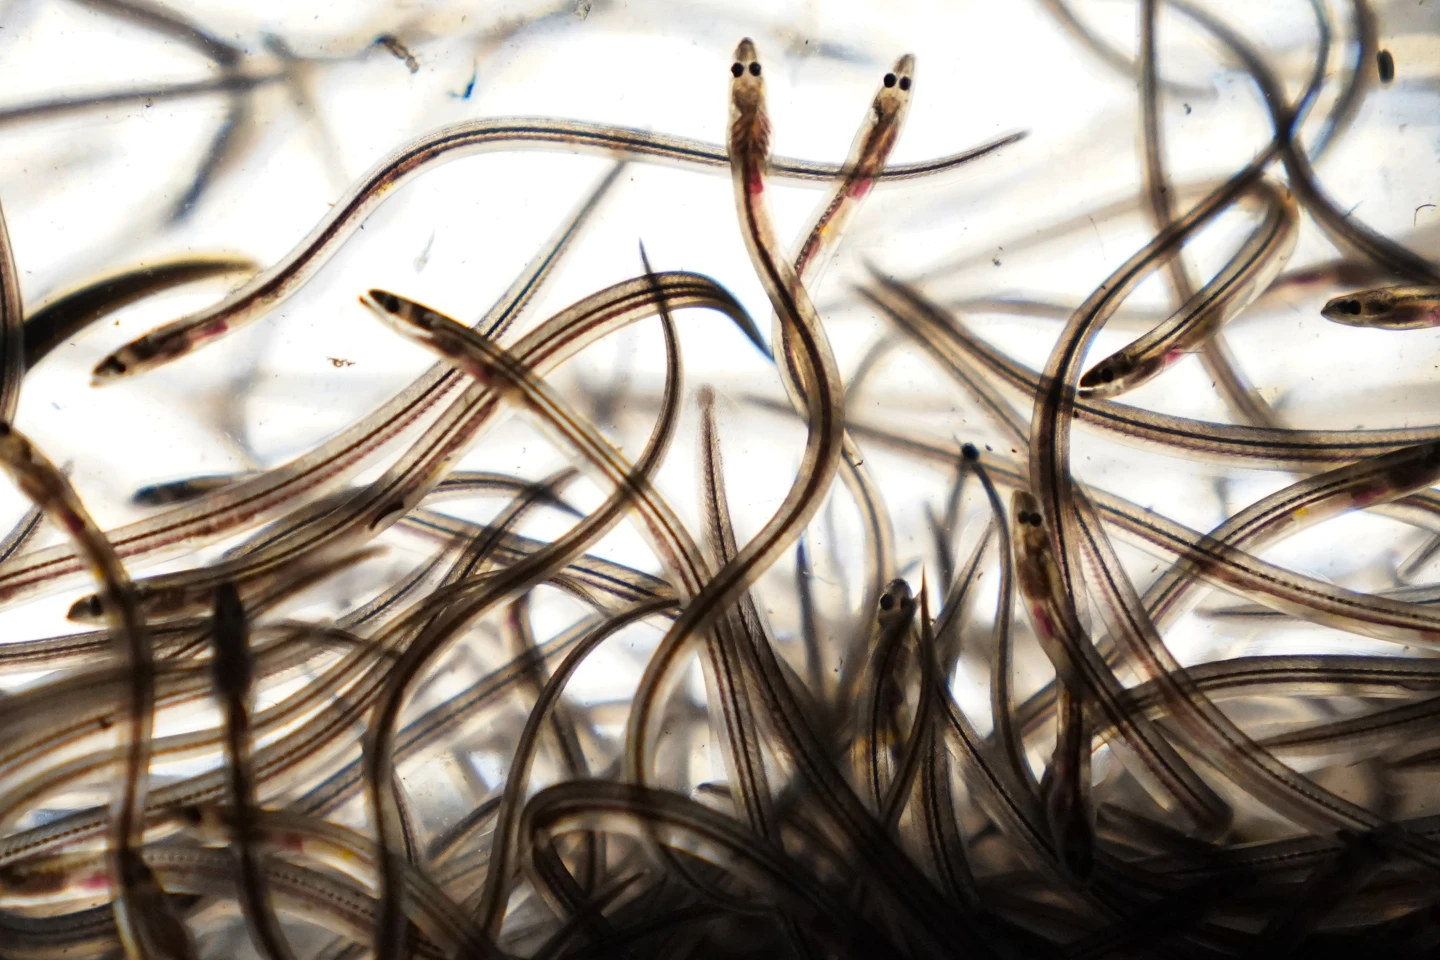 Wriggling gold: Fishermen who catch baby eels for $2,000 a pound hope for many years of fishing